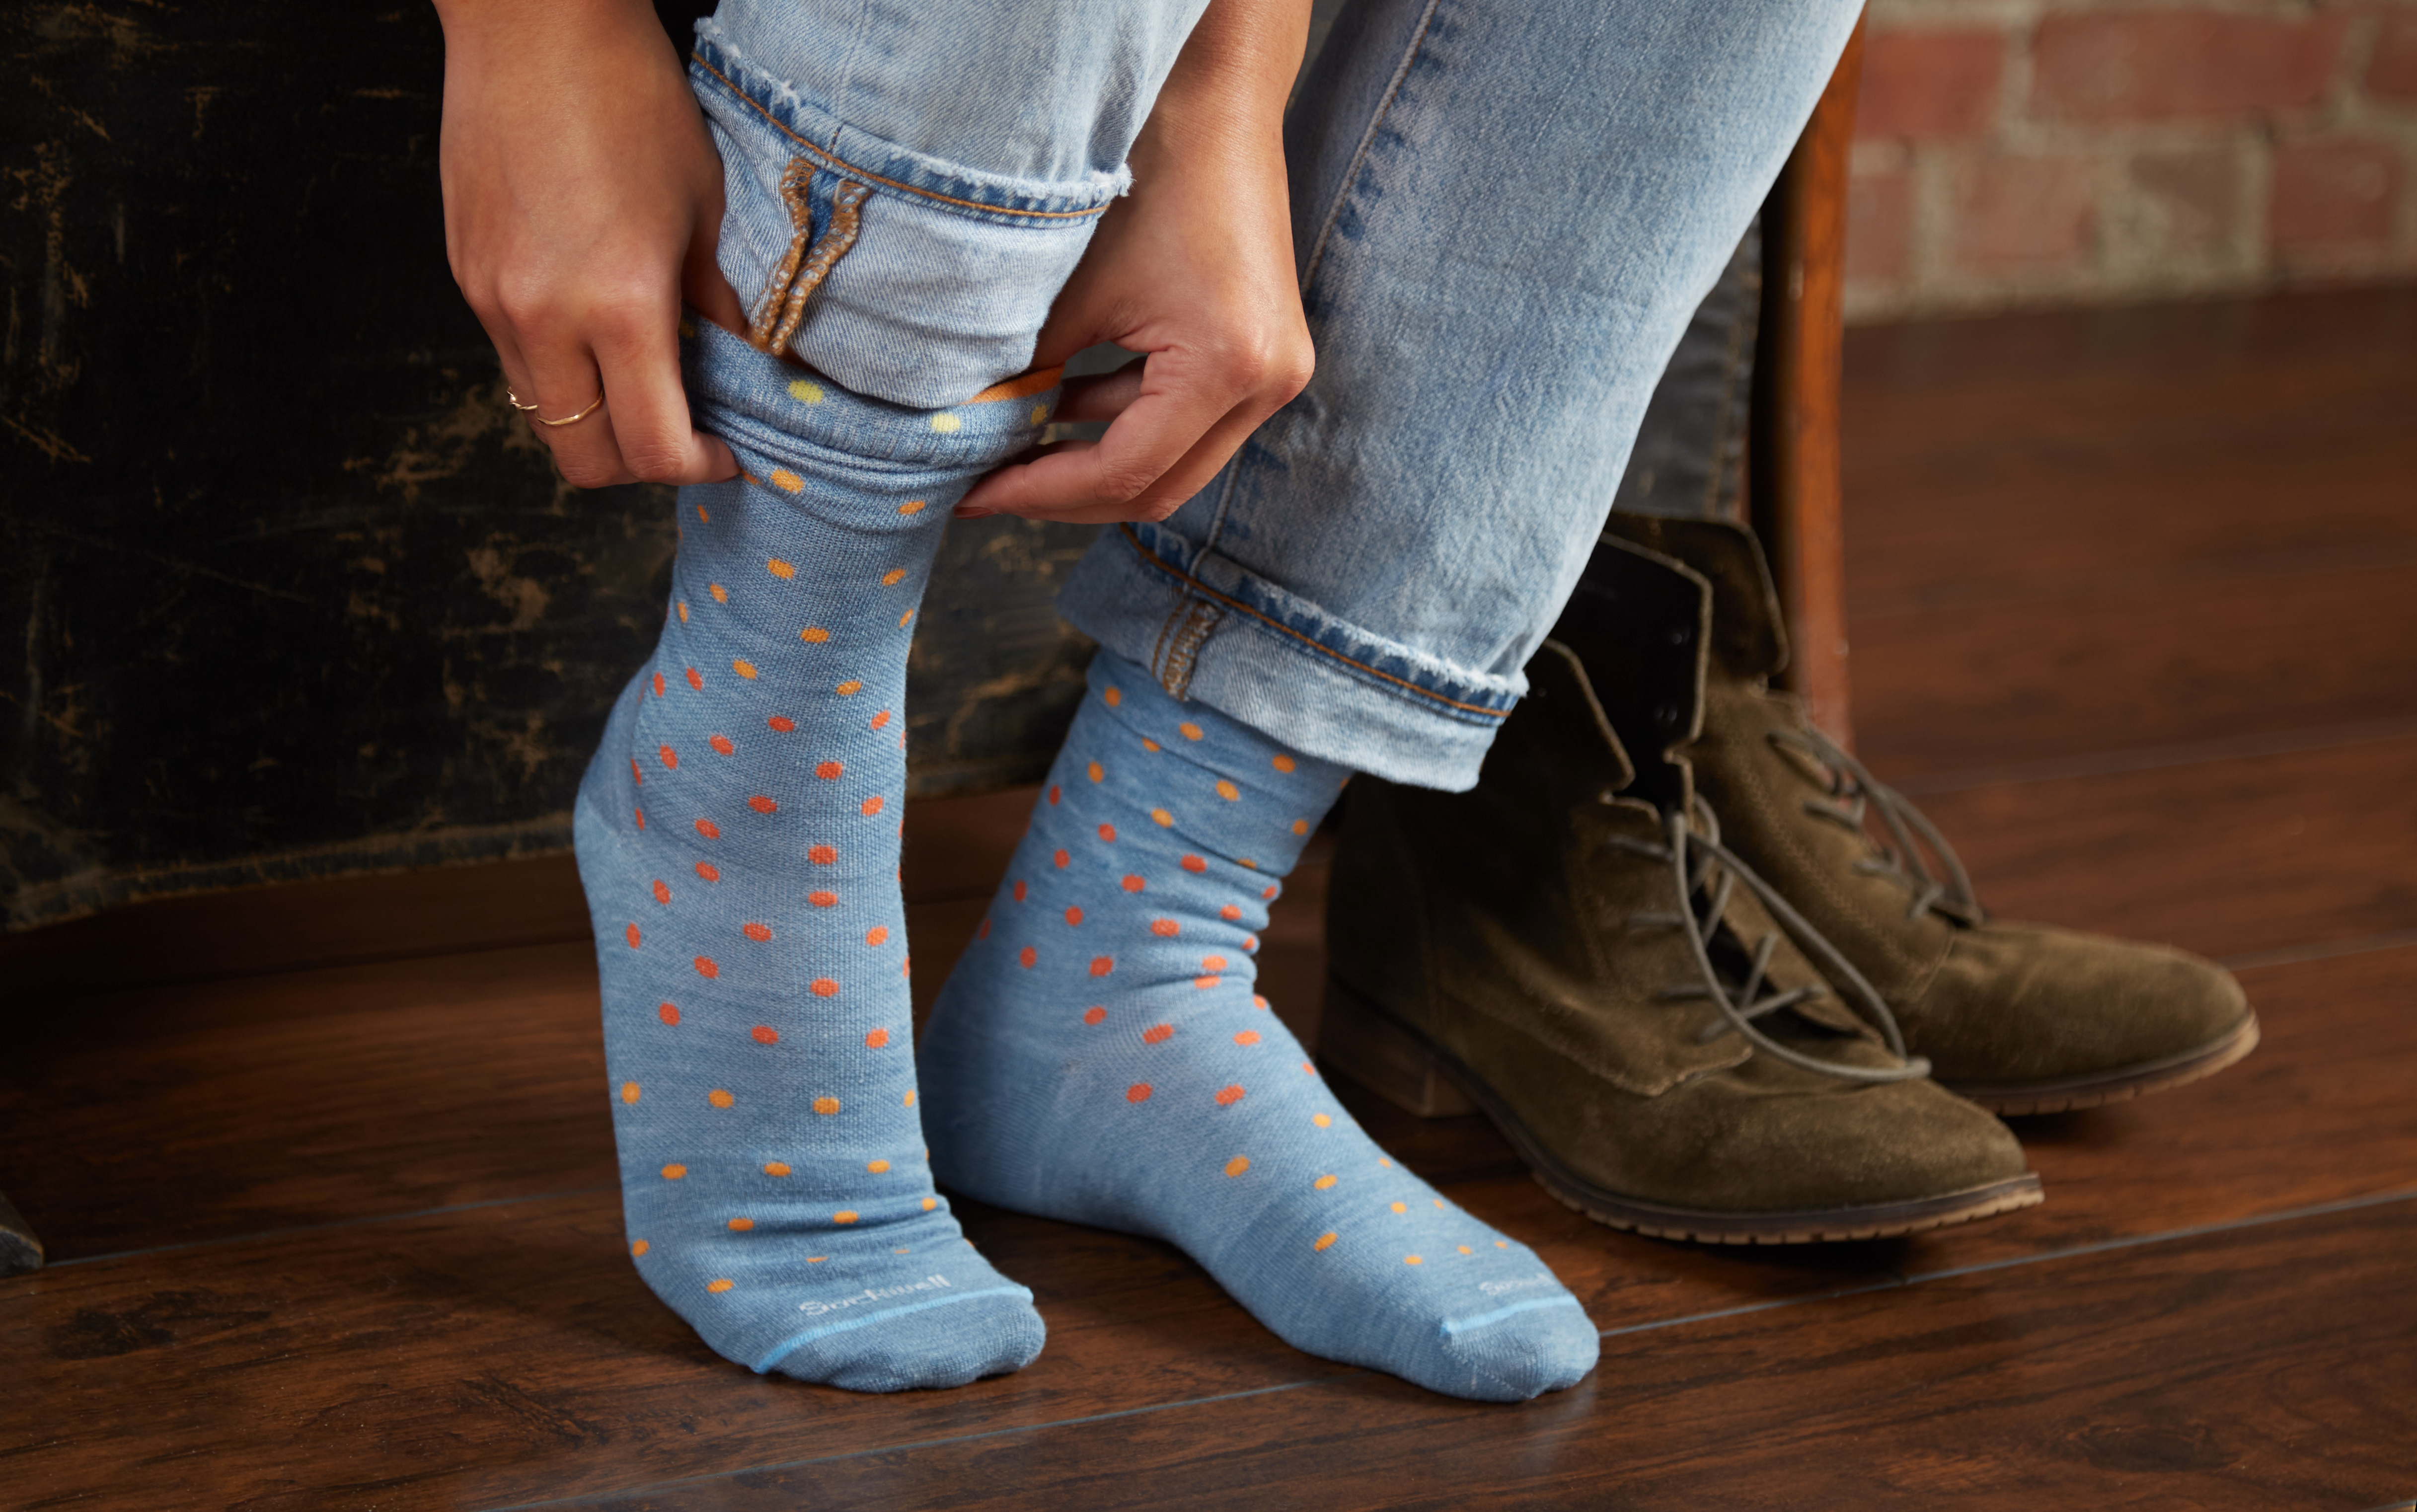 A woman is seen pulling on a pair of light blue polka dot medium compression socks from Sockwell